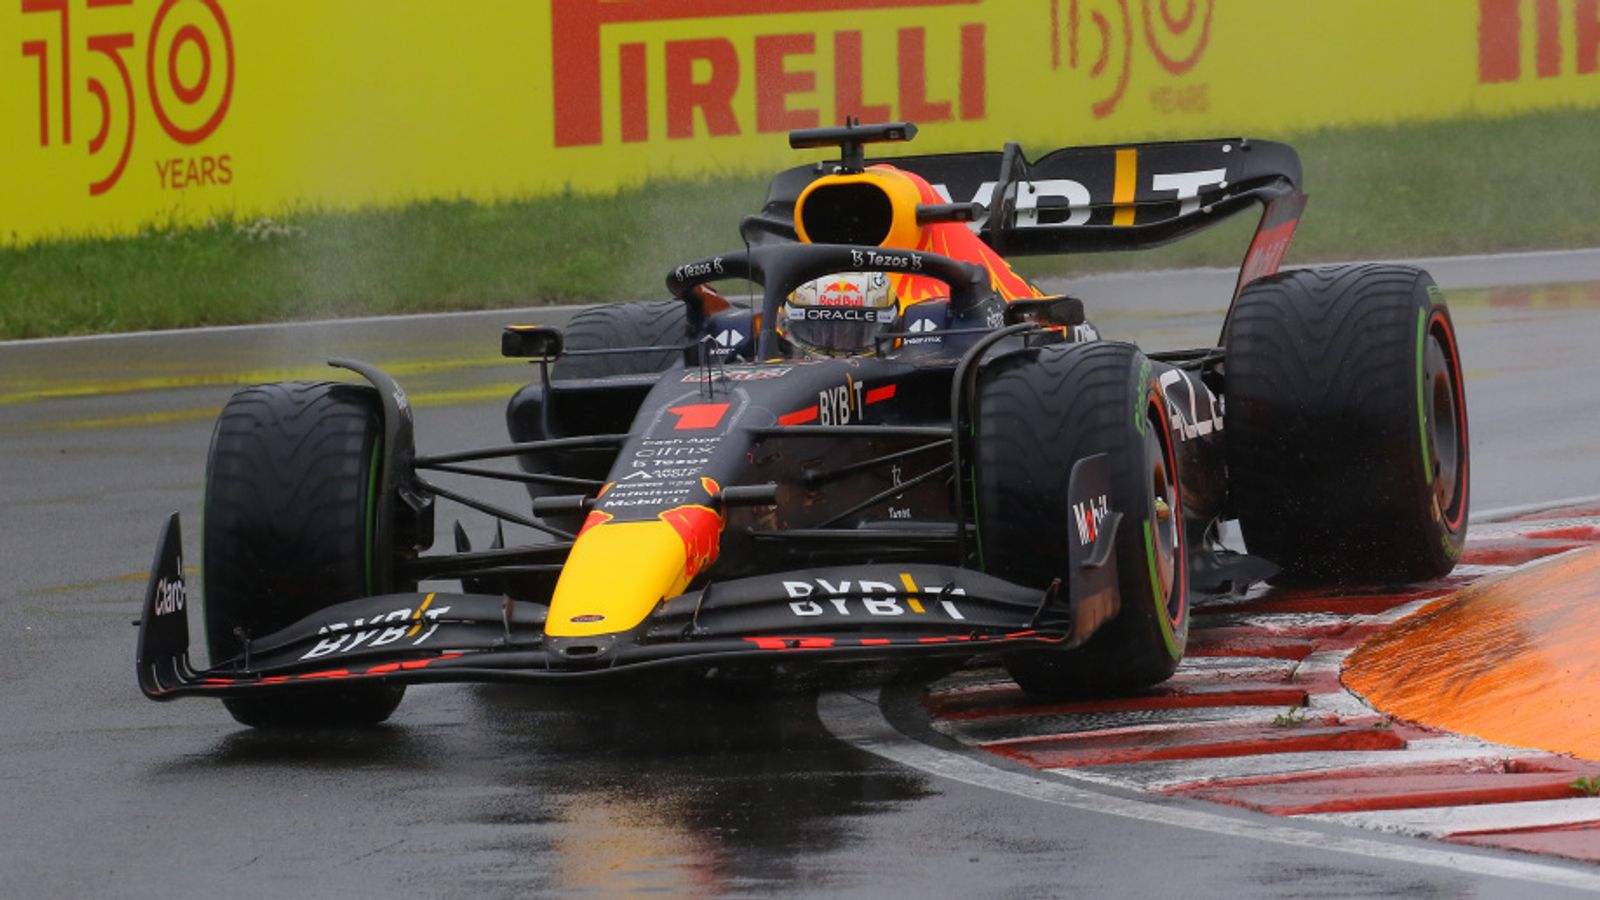 Canadian GP qualifying: Max Verstappen takes pole after Red Bull team-mate Sergio Perez crashes out in wet Montreal